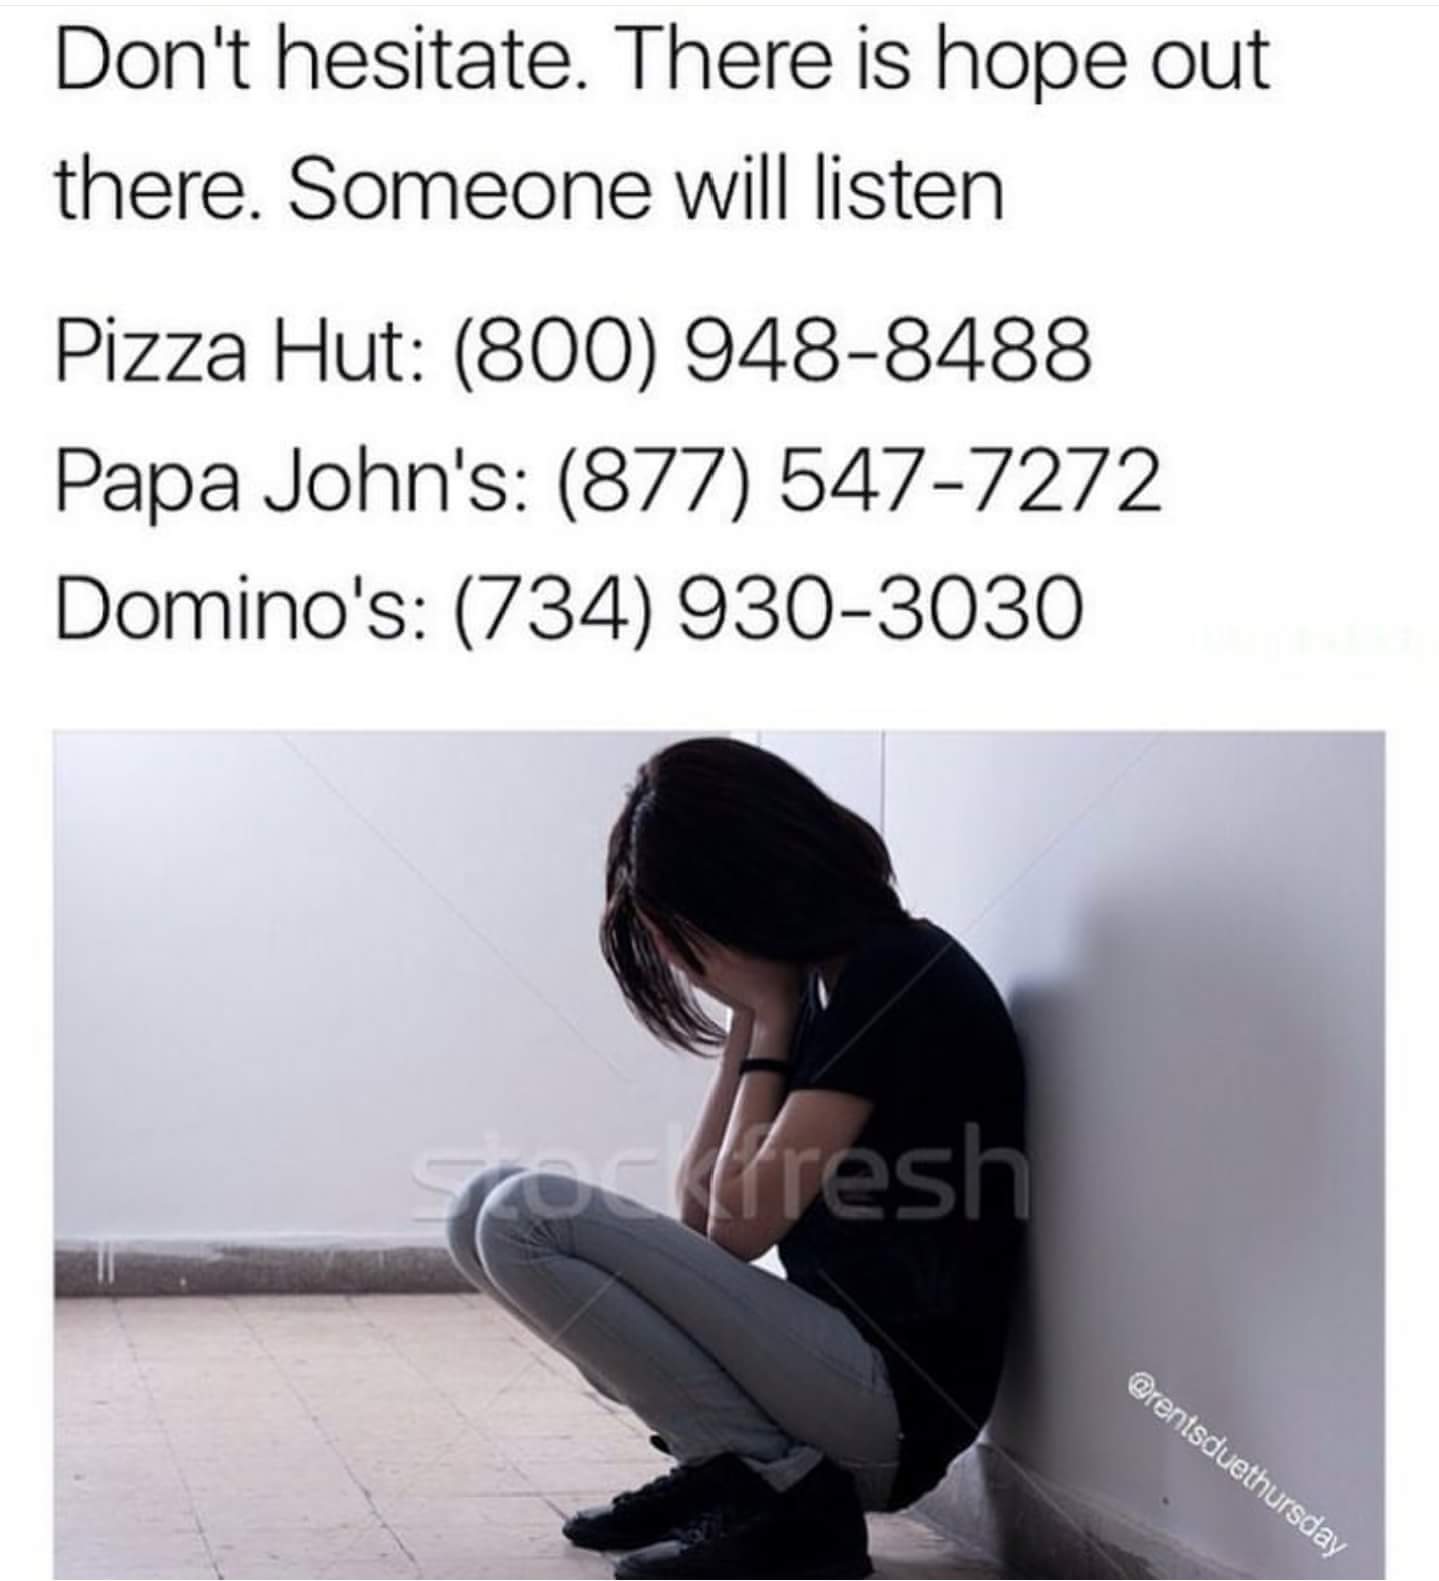 make you cry jokes - Don't hesitate. There is hope out there. Someone will listen Pizza Hut 800 9488488 Papa John's 877 5477272 Domino's 734 9303030 Ifresh